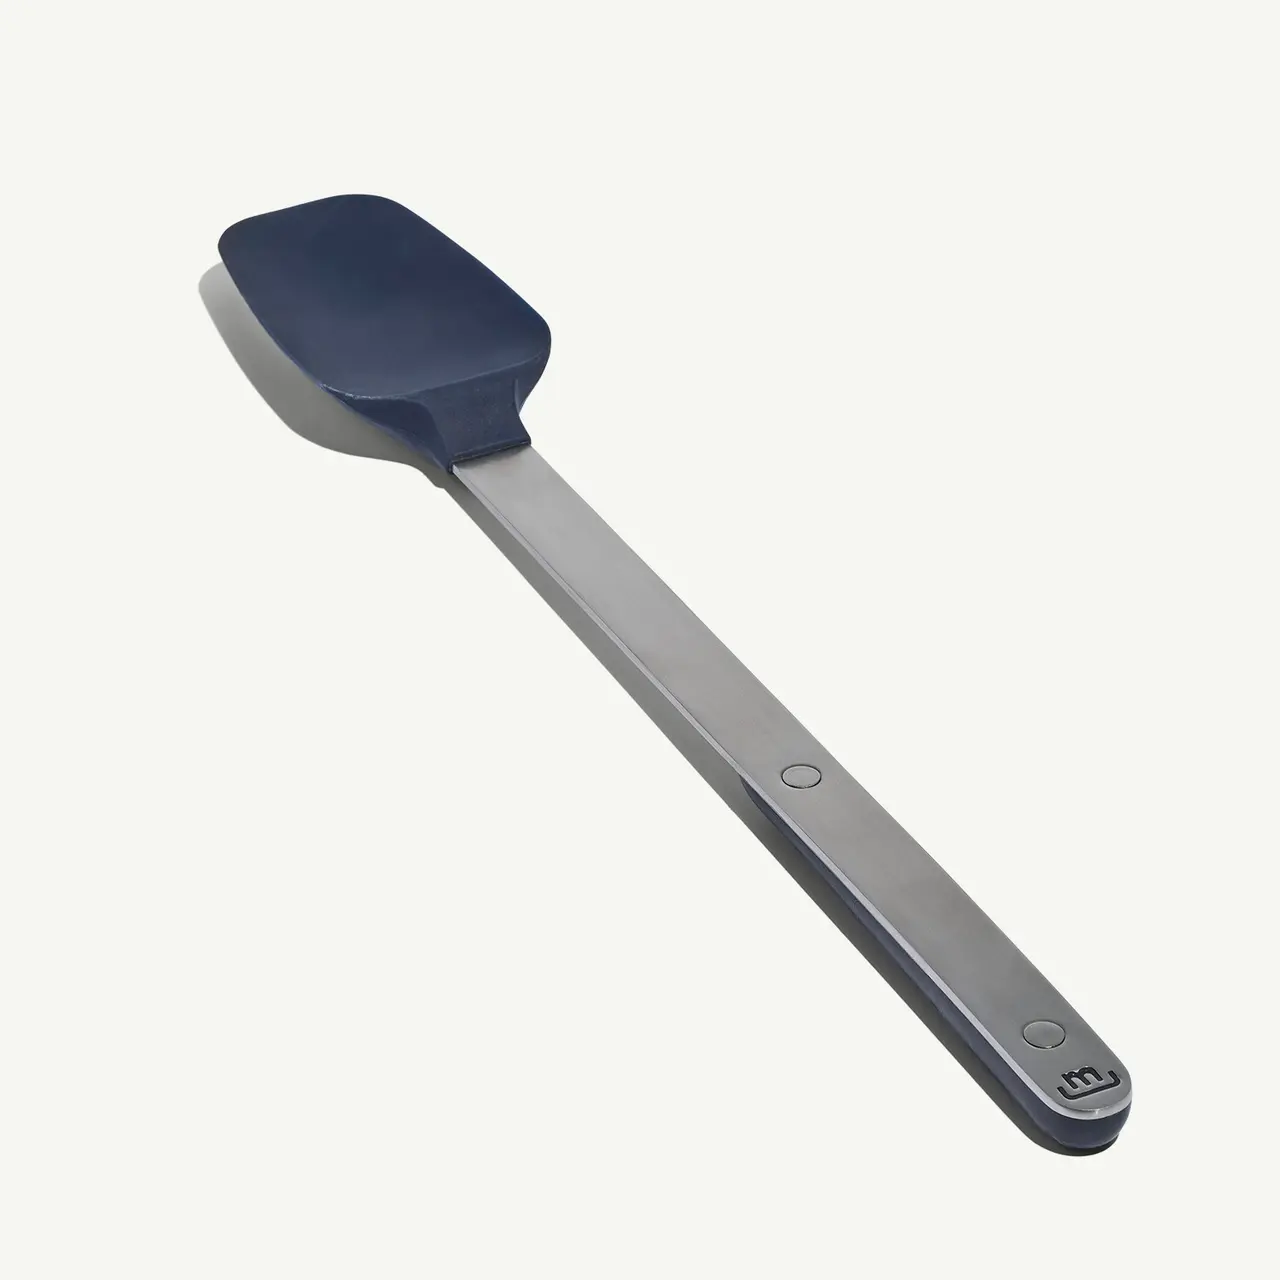 A silicone spatula with a stainless steel handle is displayed against a light background.